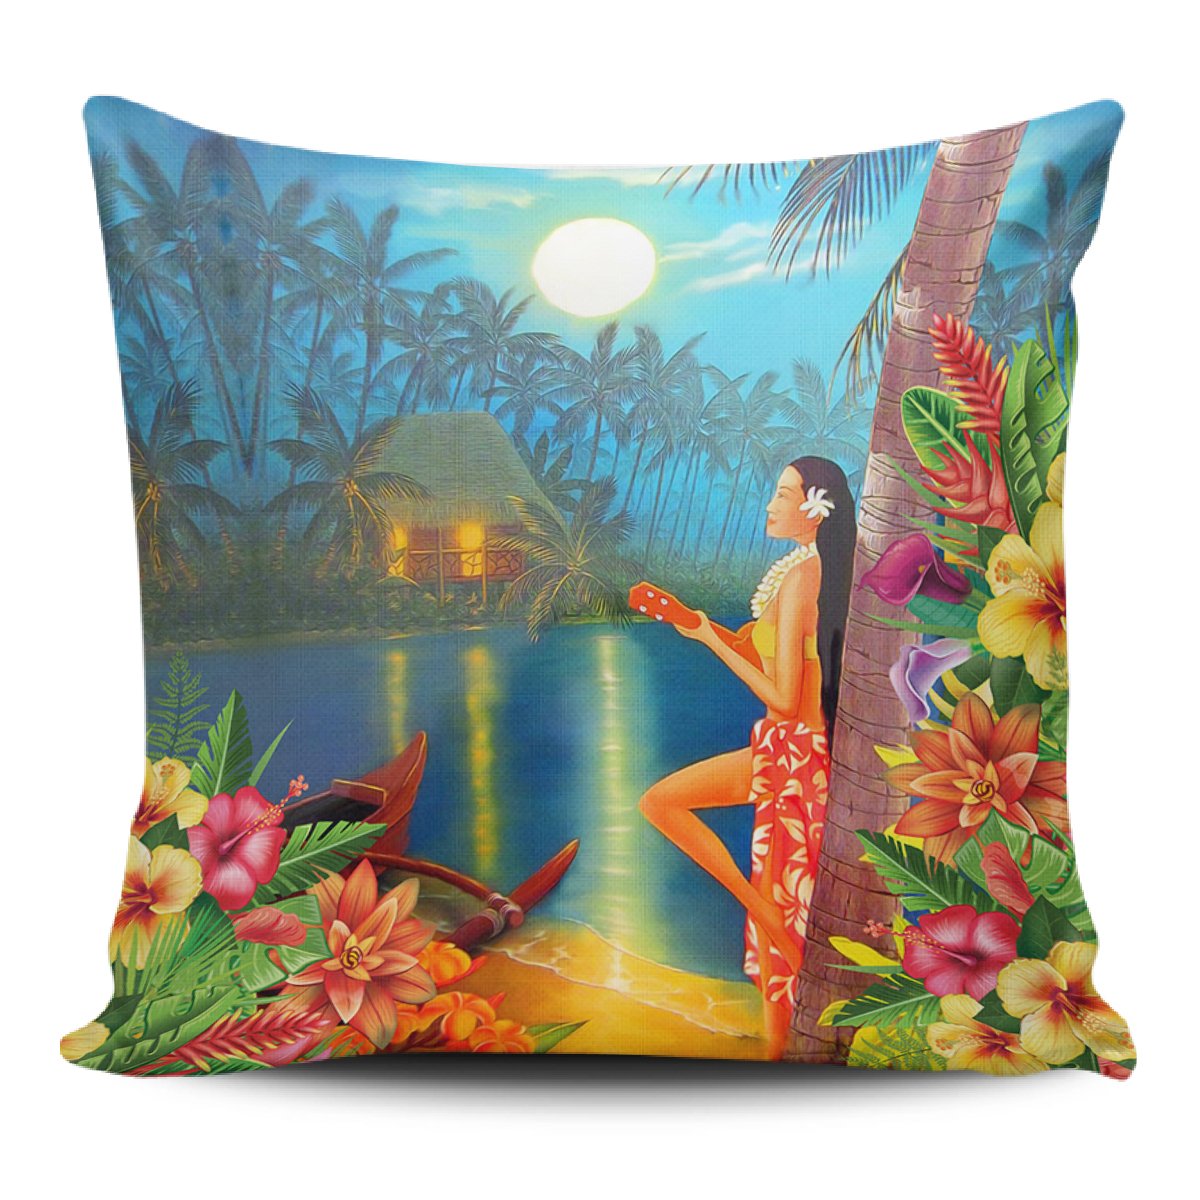 Hula Girl Sing In Village Pillow Covers One Size Zippered Pillow Case 18"x18"(Twin Sides) Black - Polynesian Pride